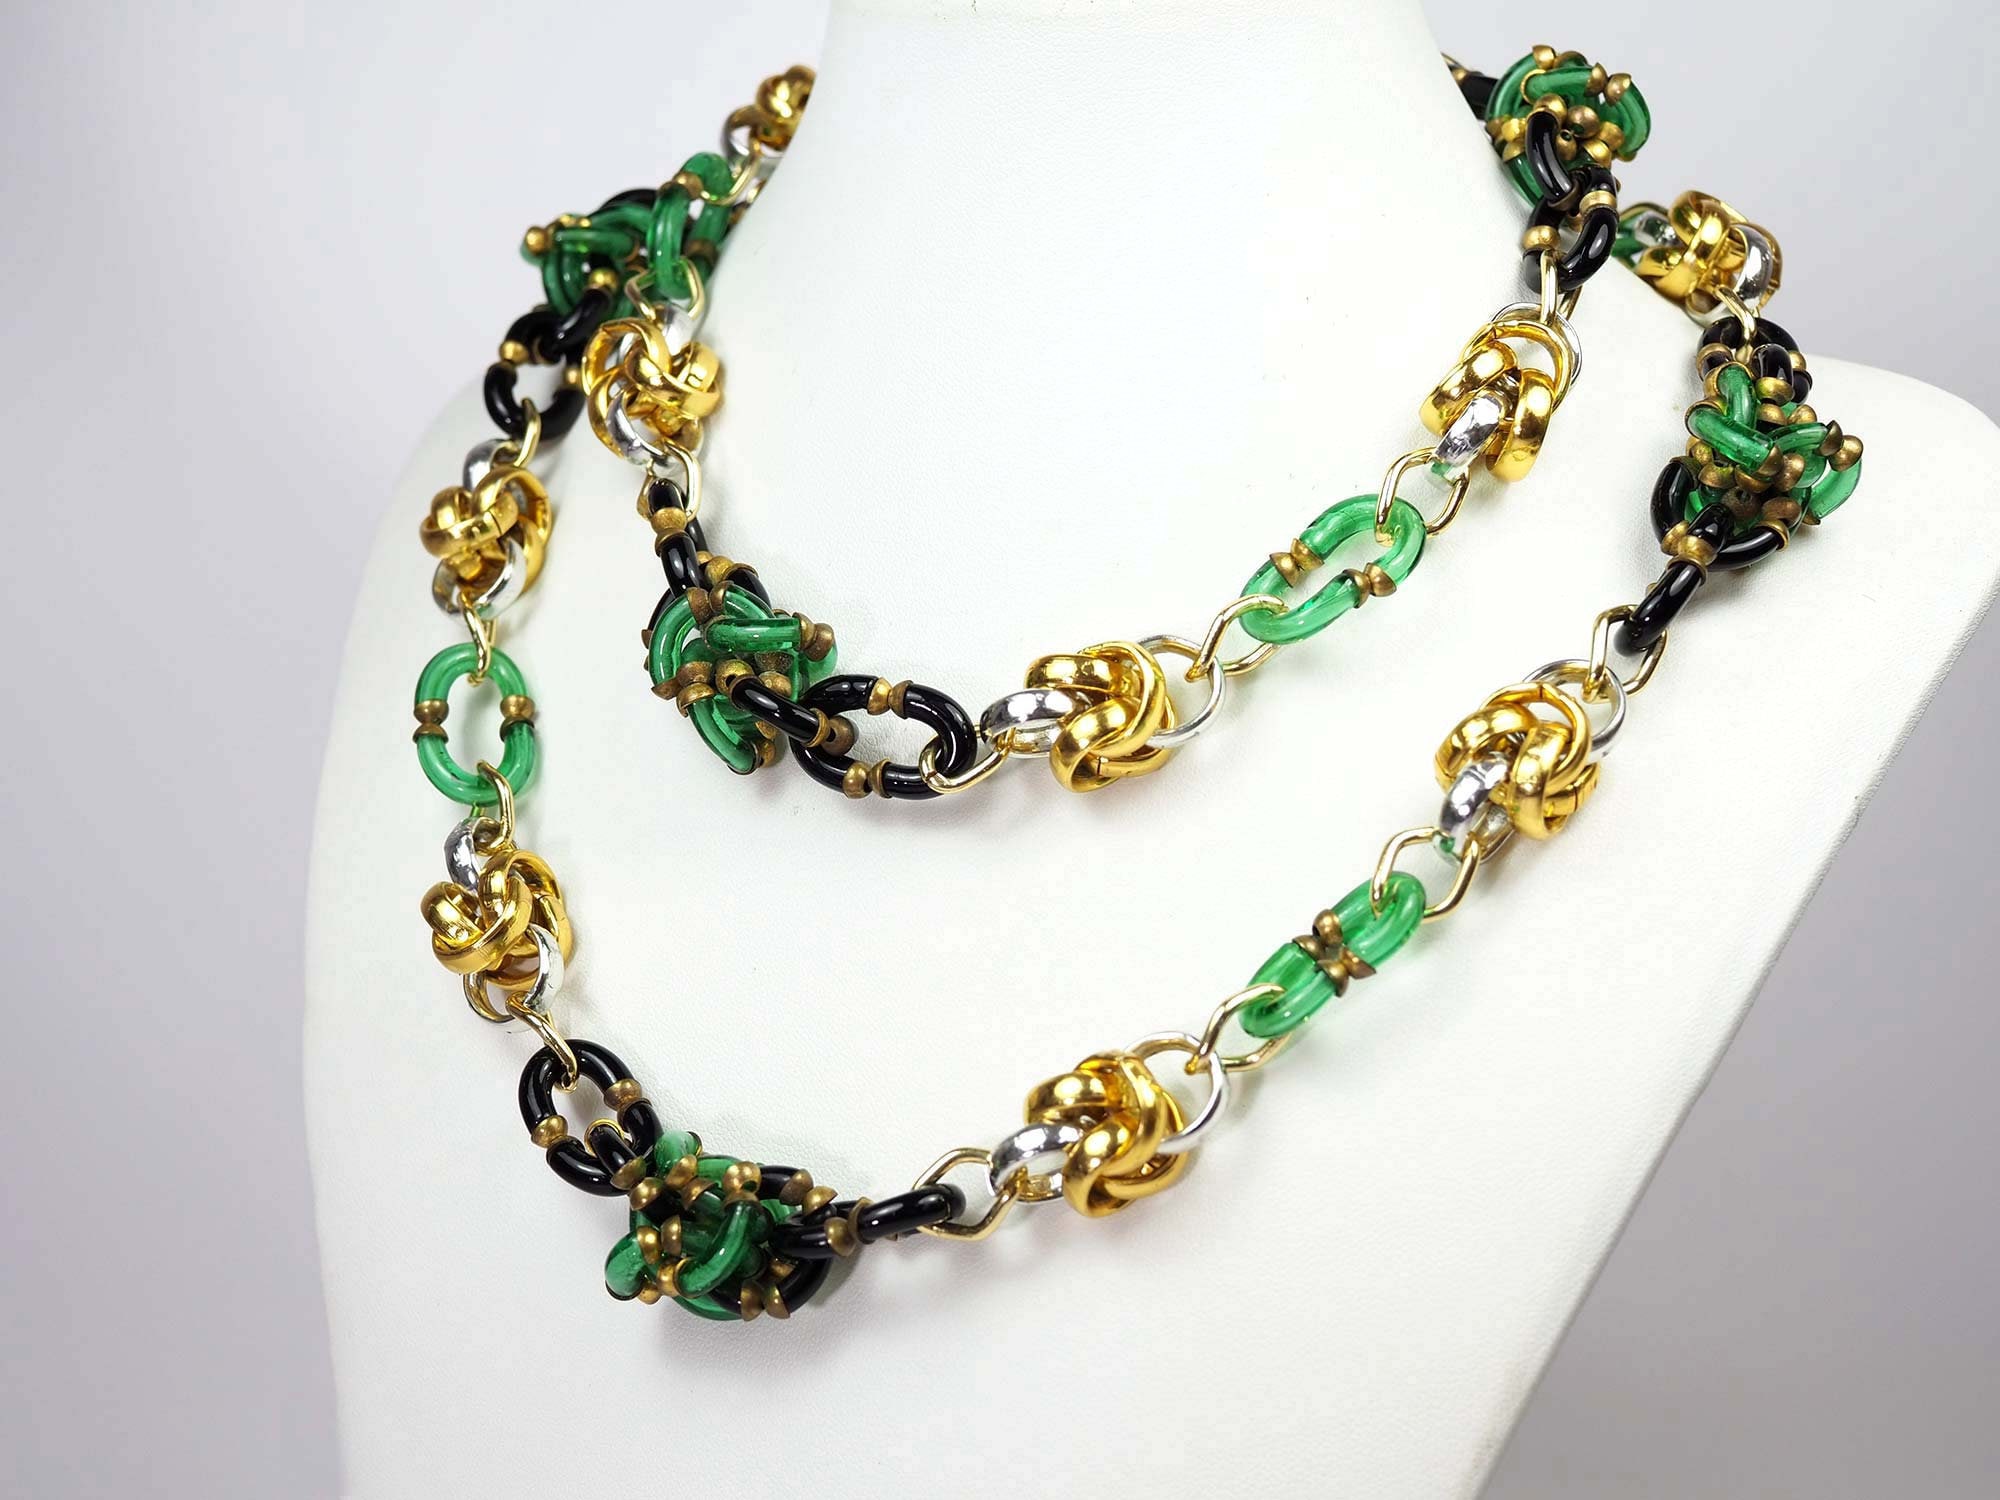 Chanel Necklace by Archimede Seguso-1960s 